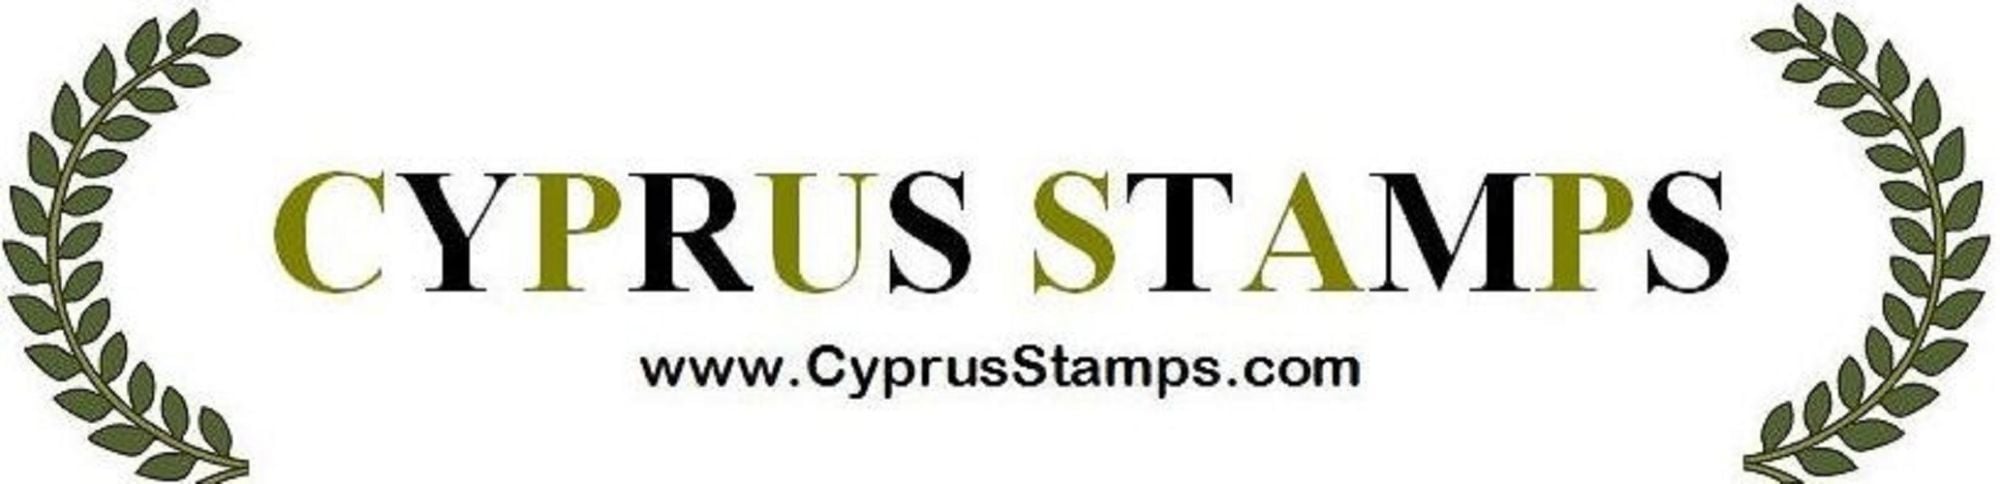 Cyprus Stamps Website shop for Cyprus and North Cyprus stamps.